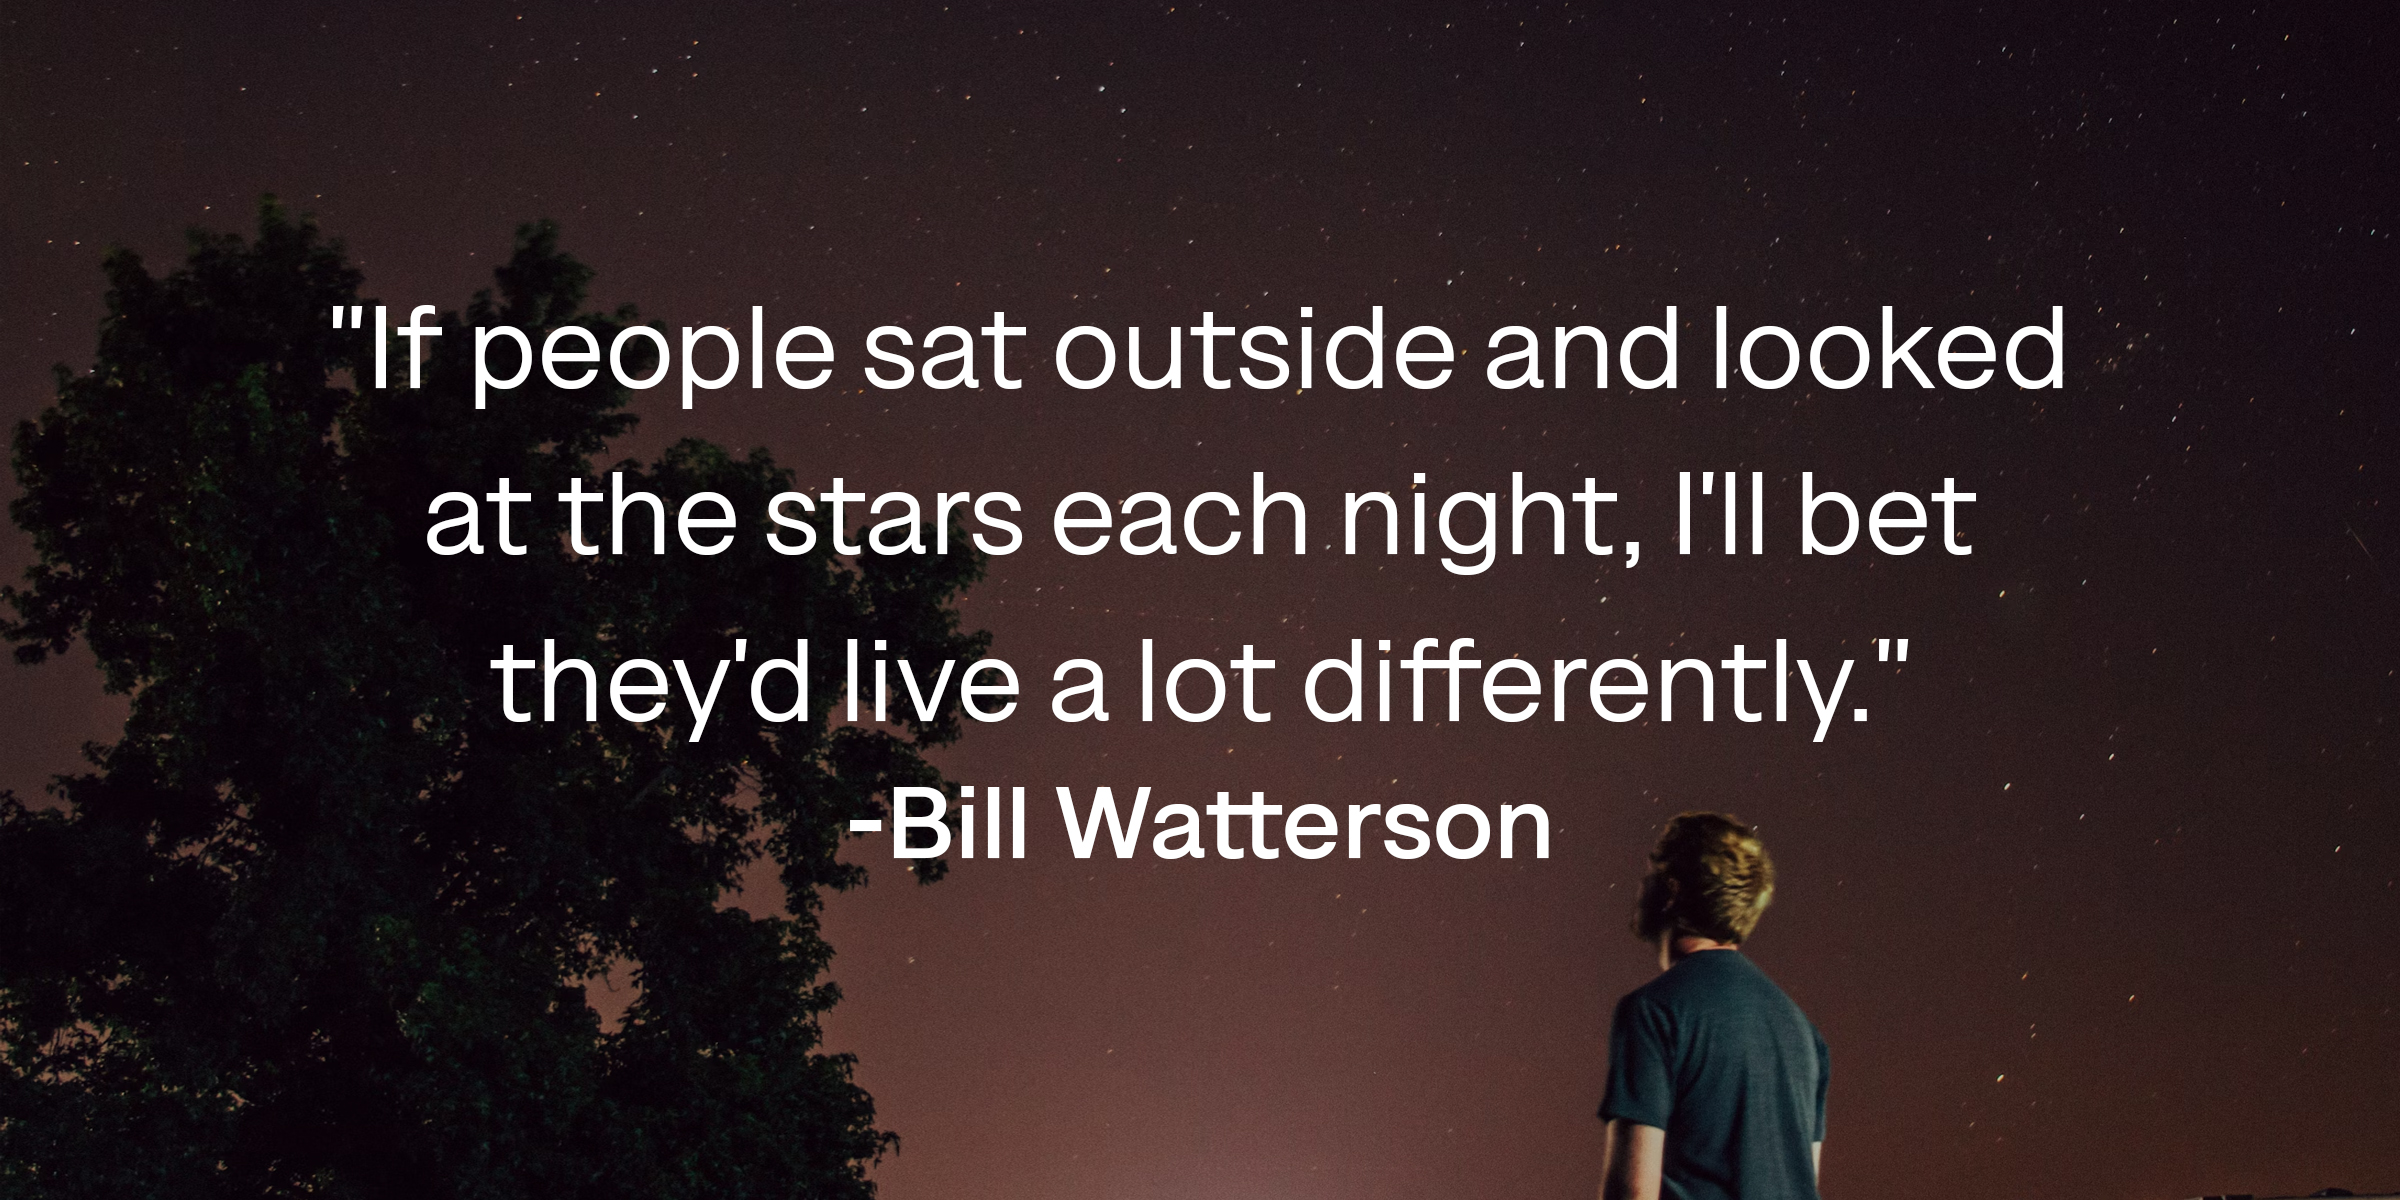 Bill Watterson's quote: "If people sat outside and looked at the stars each night, I'll bet they'd live a lot differently."| Source: Countryliving